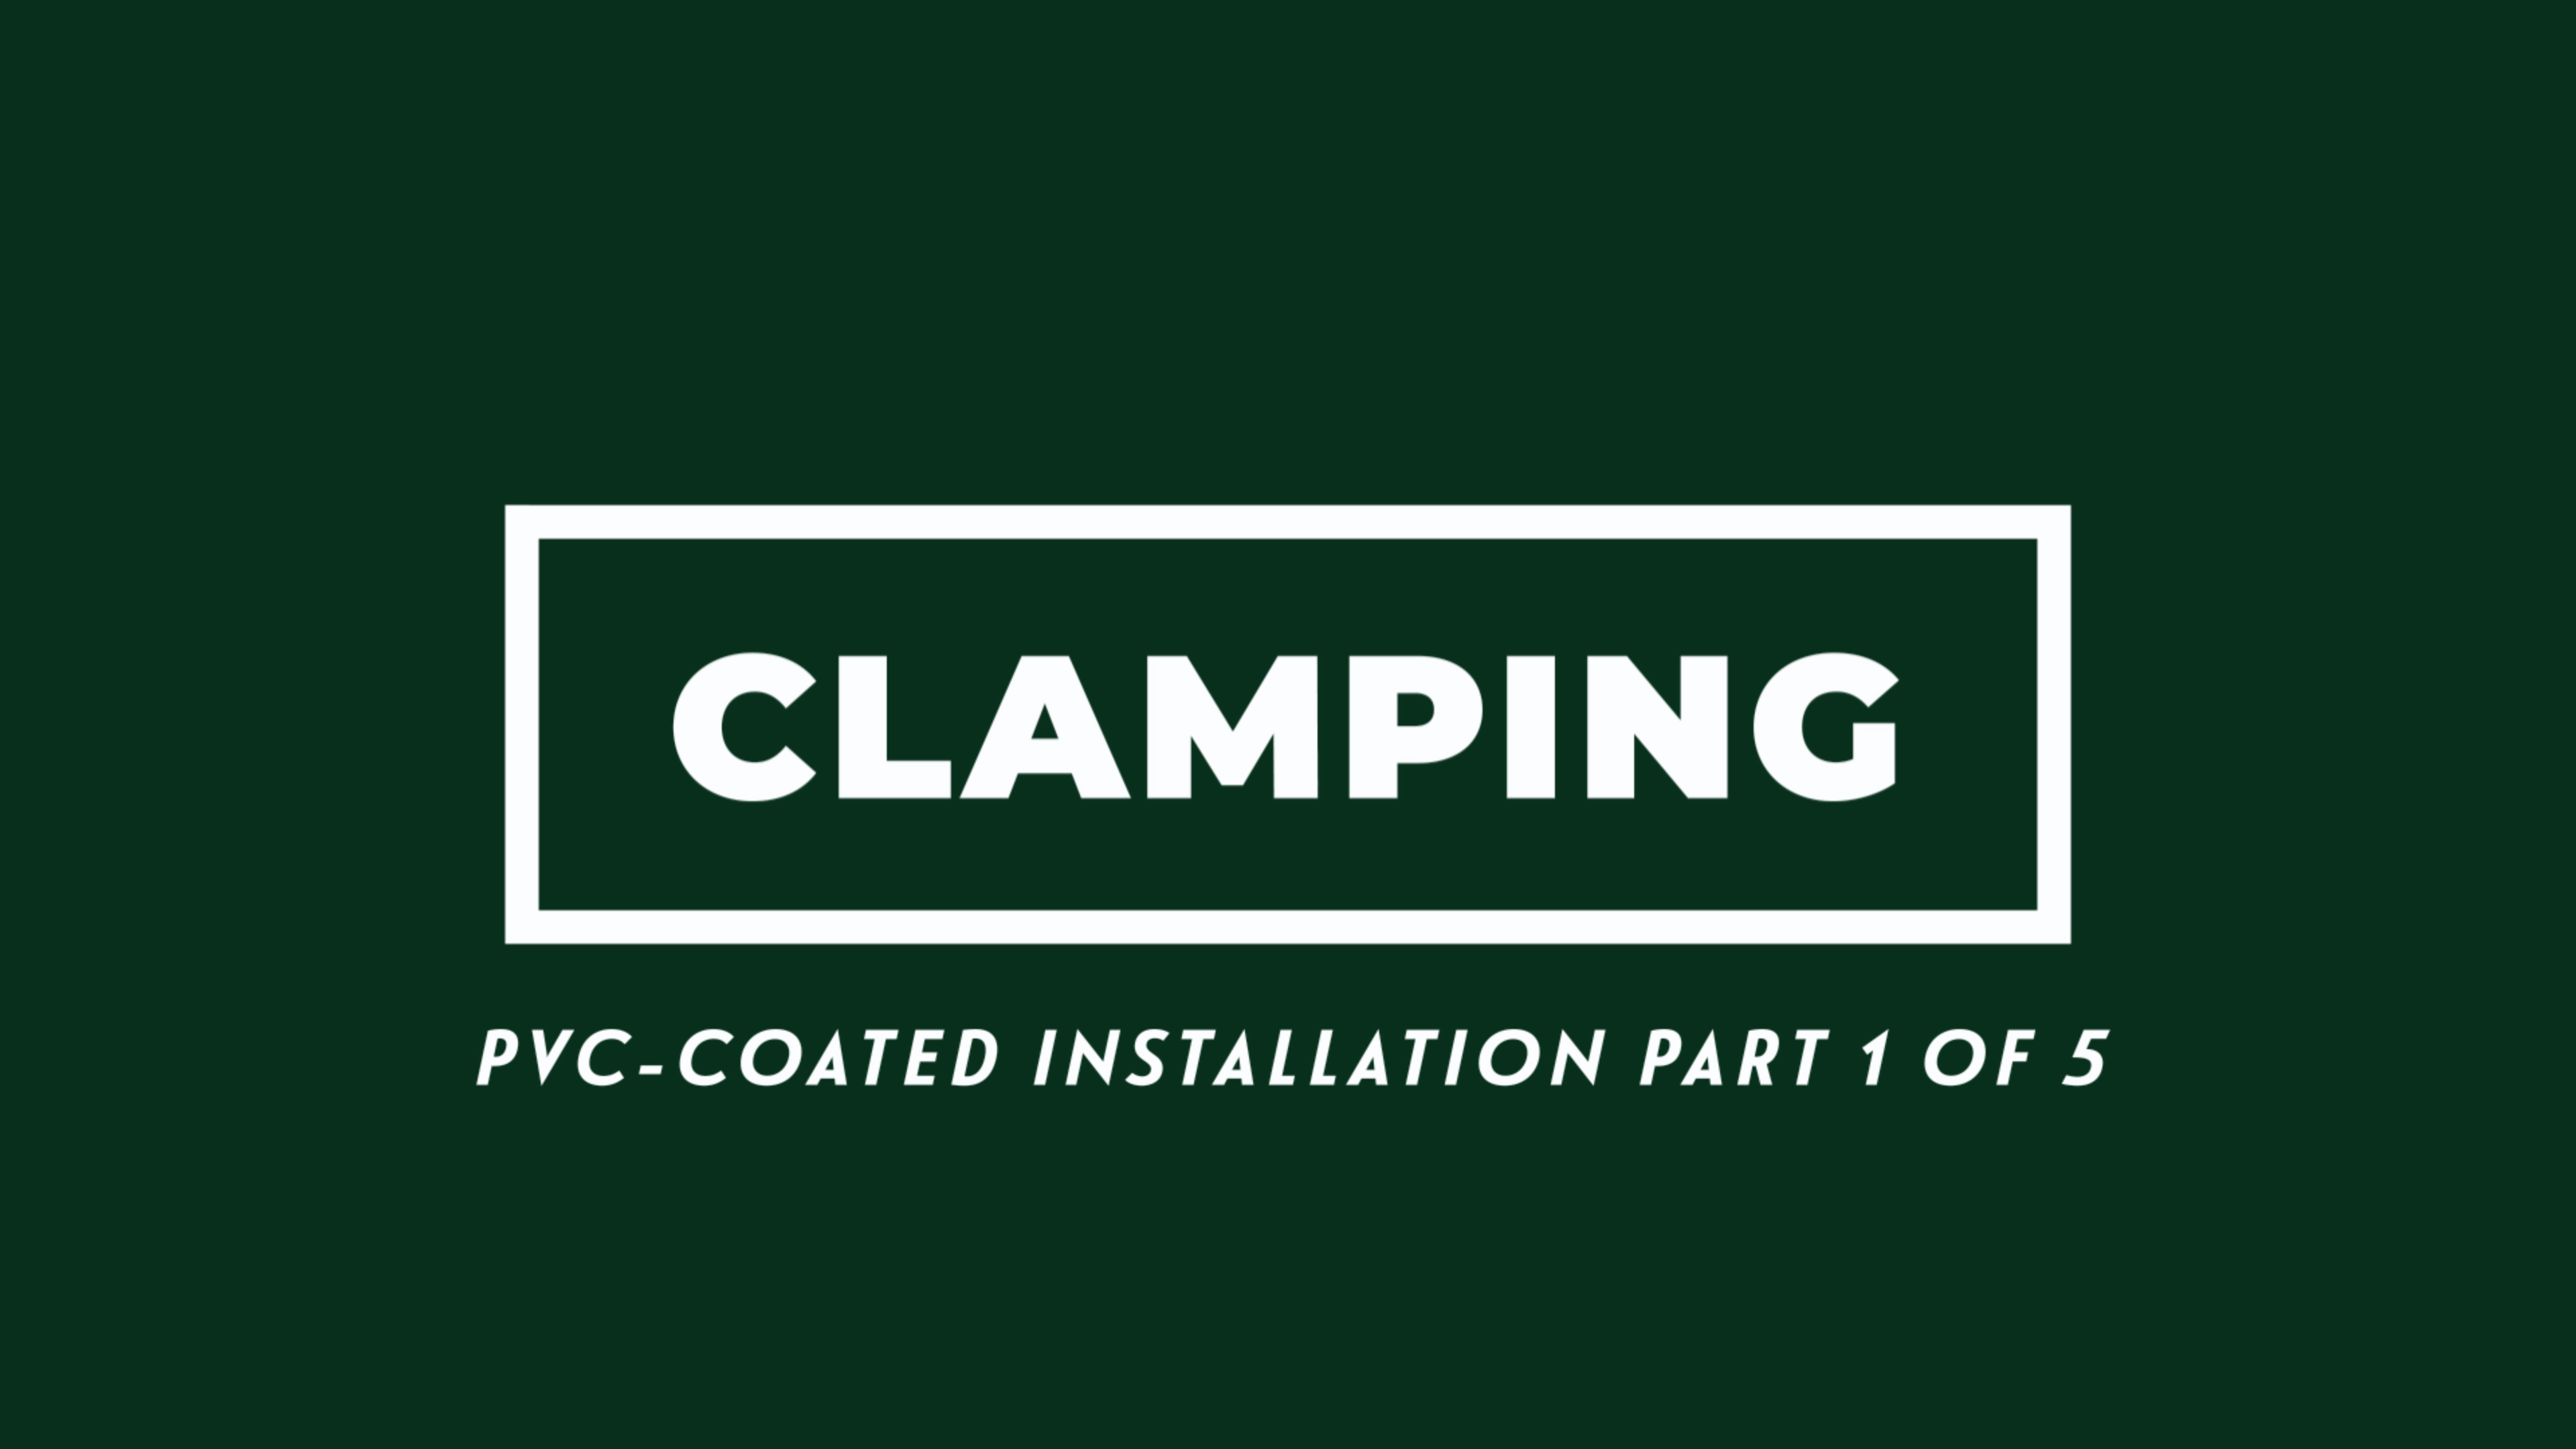 Clamping - PVC-Coated Conduit Installation Part 1 of 5 Video